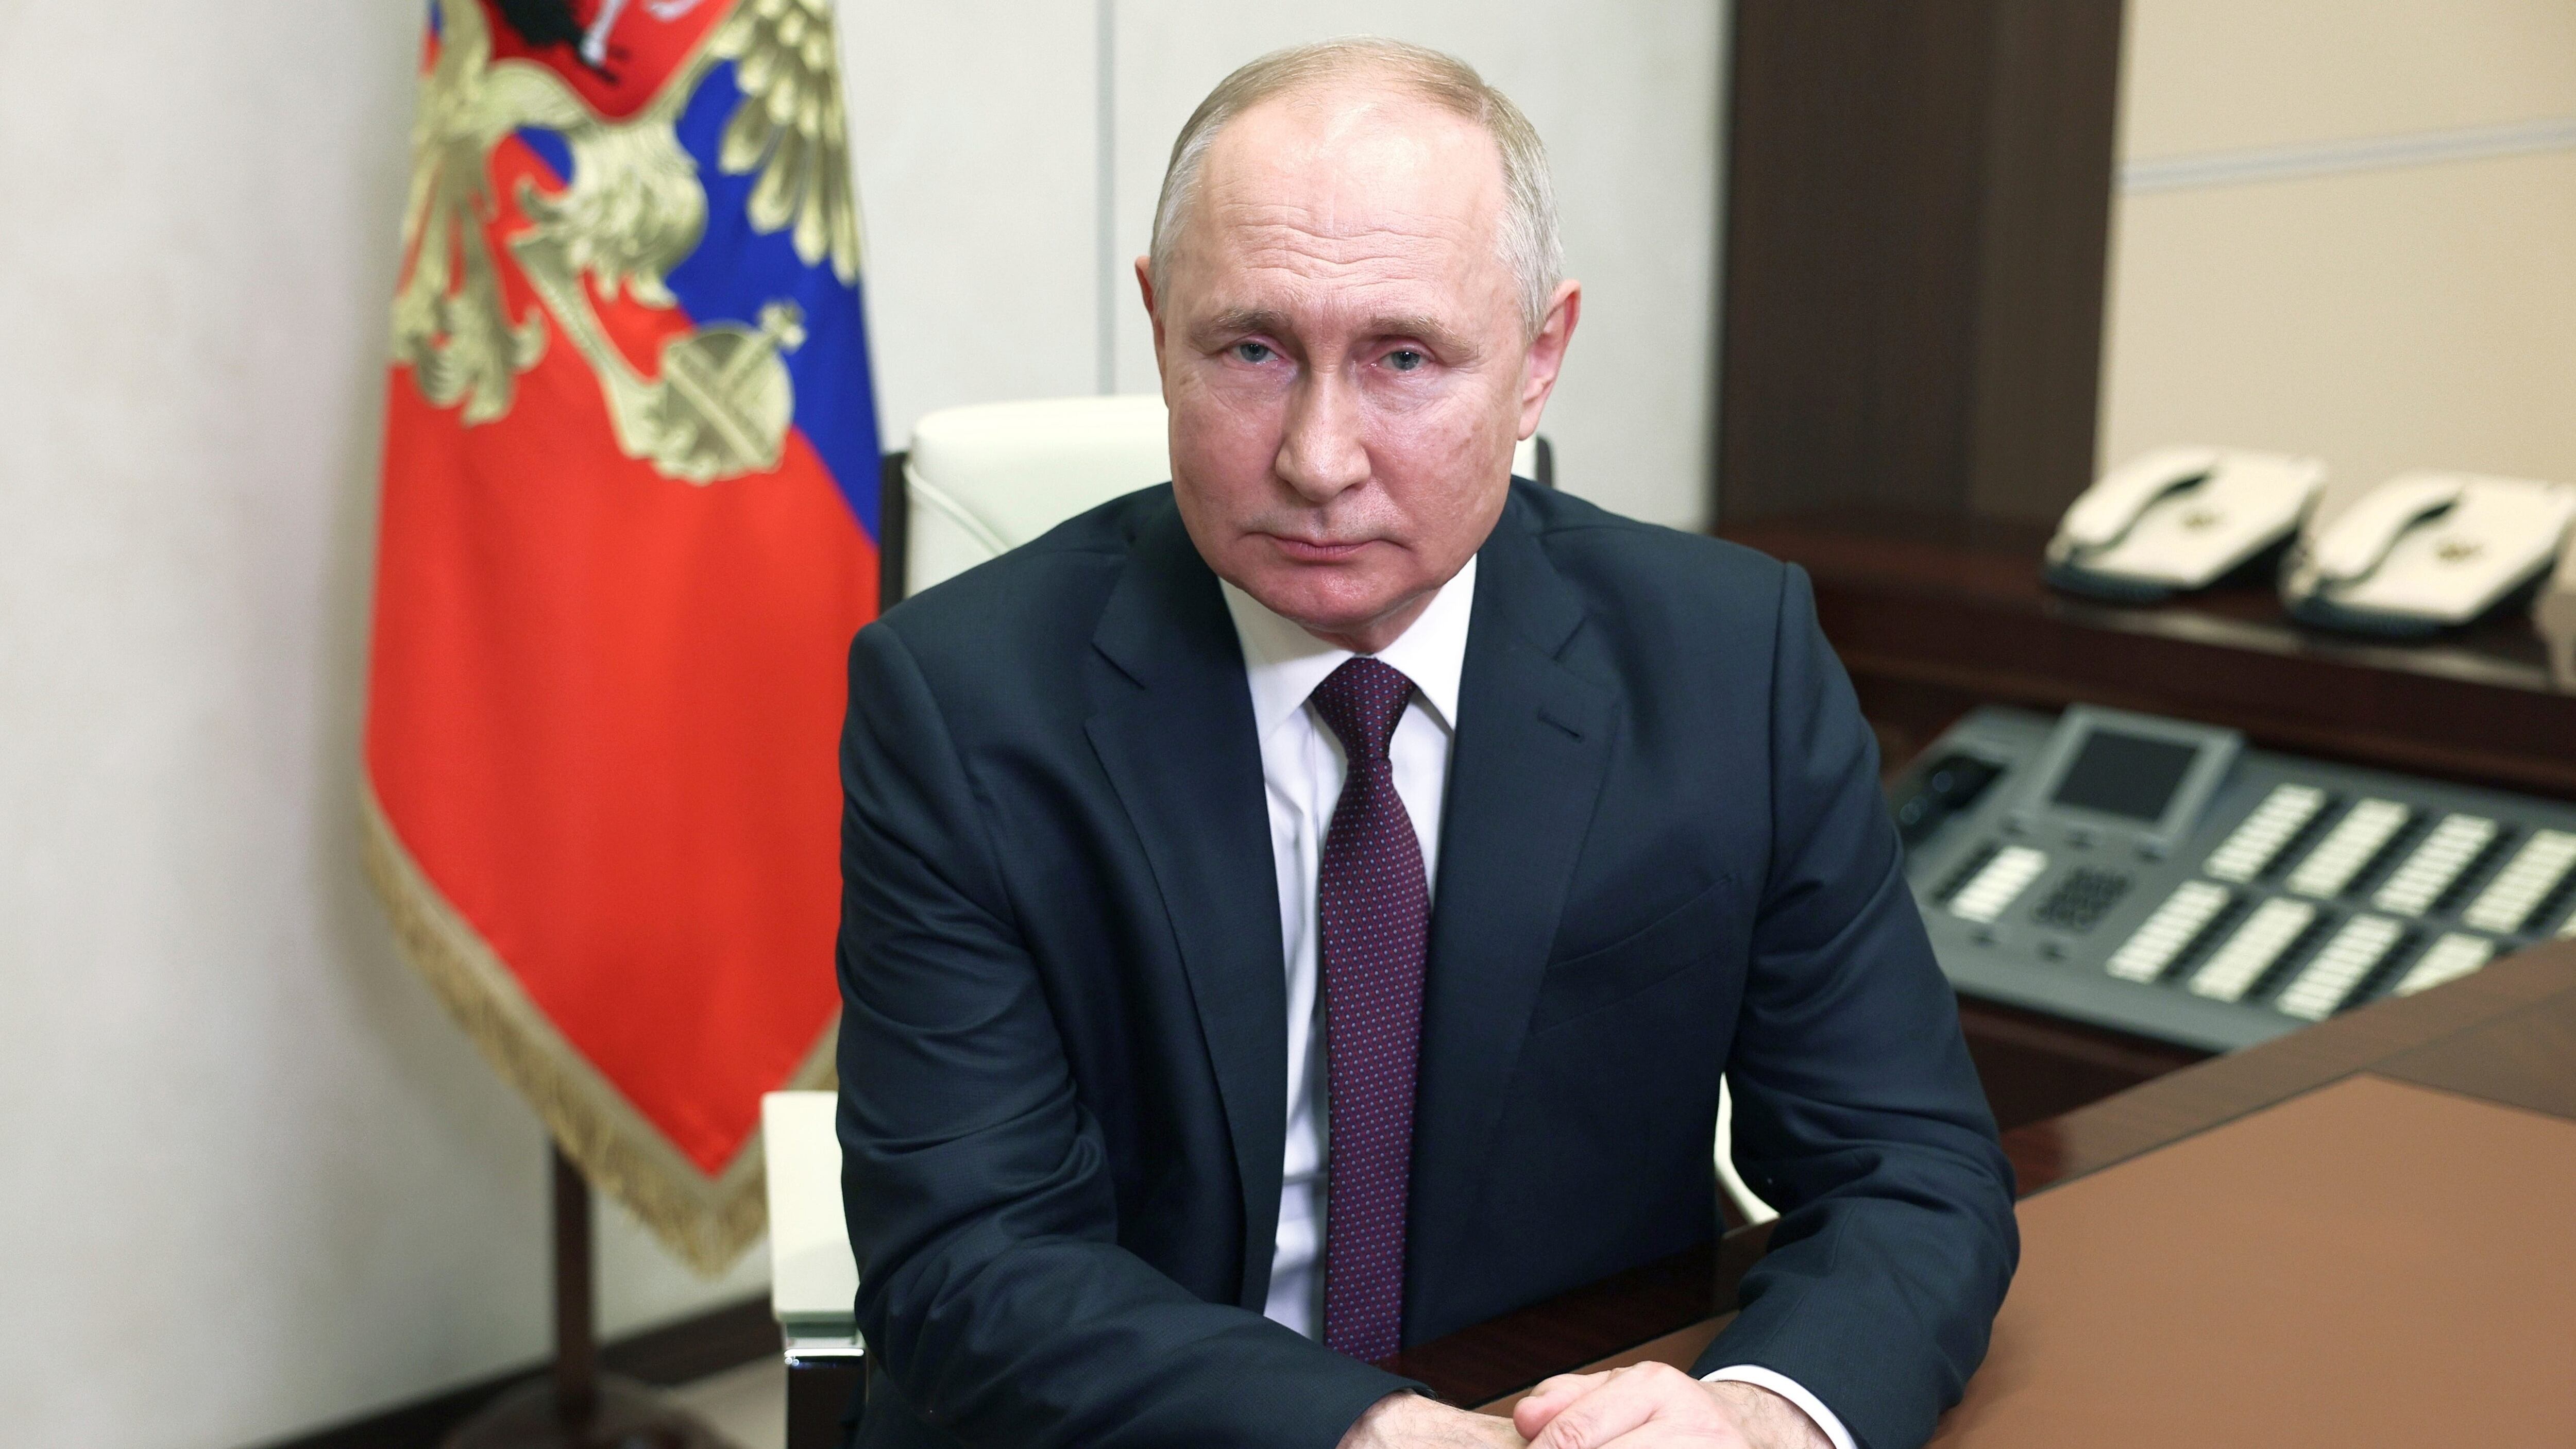 Russian President Vladimir Putin has approved changes to the law that governs presidential elections, putting new restrictions on media coverage (Gavriil Grigorov/ Sputnik/Kremlin Pool Photo/AP)